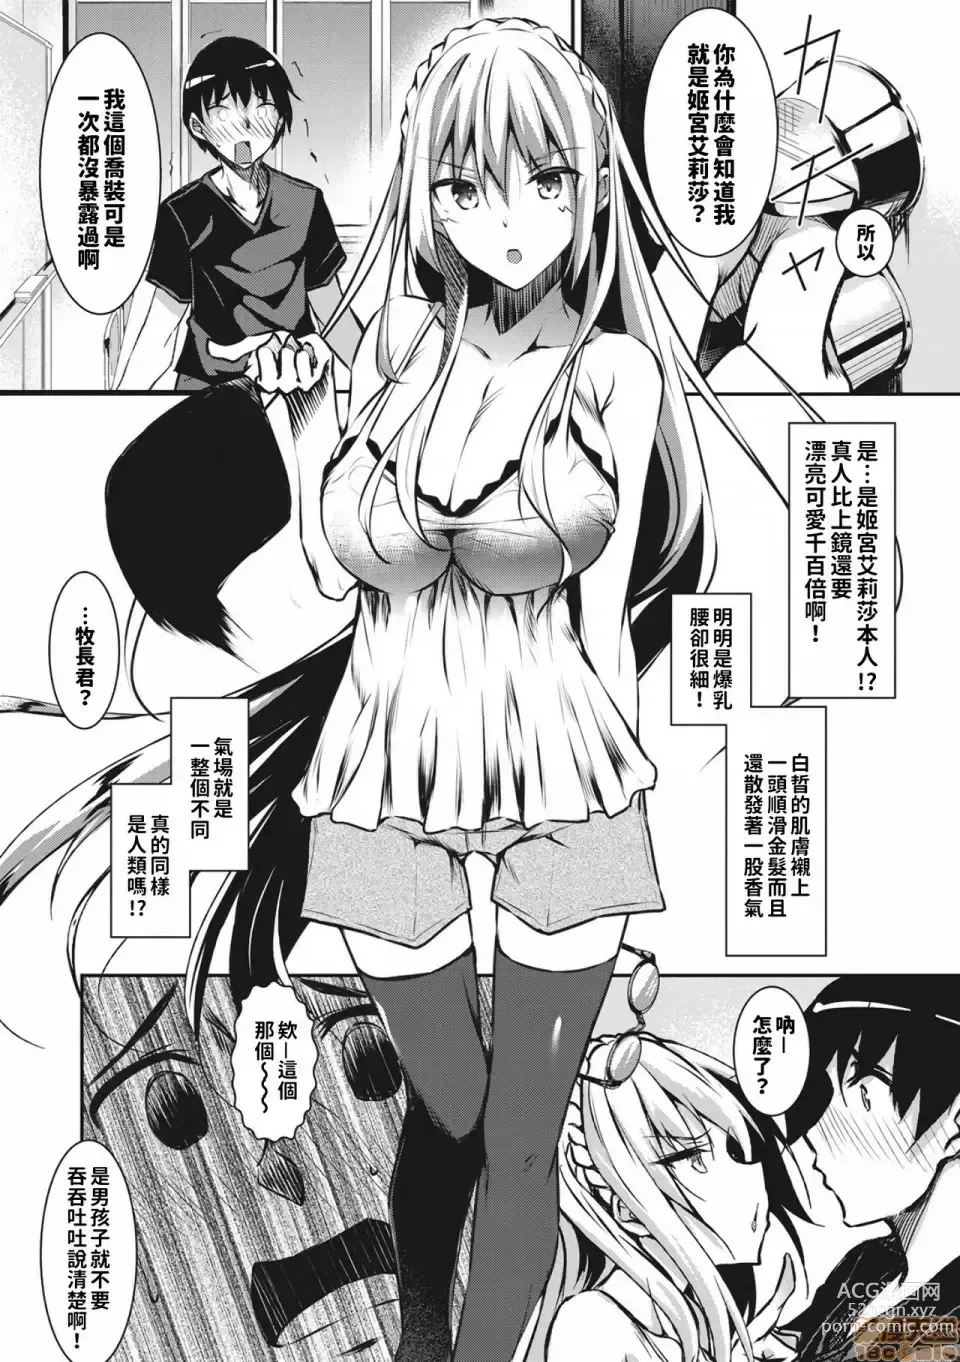 Page 9 of doujinshi Milk Mamire1+Special+FL+SideStory Full-Version